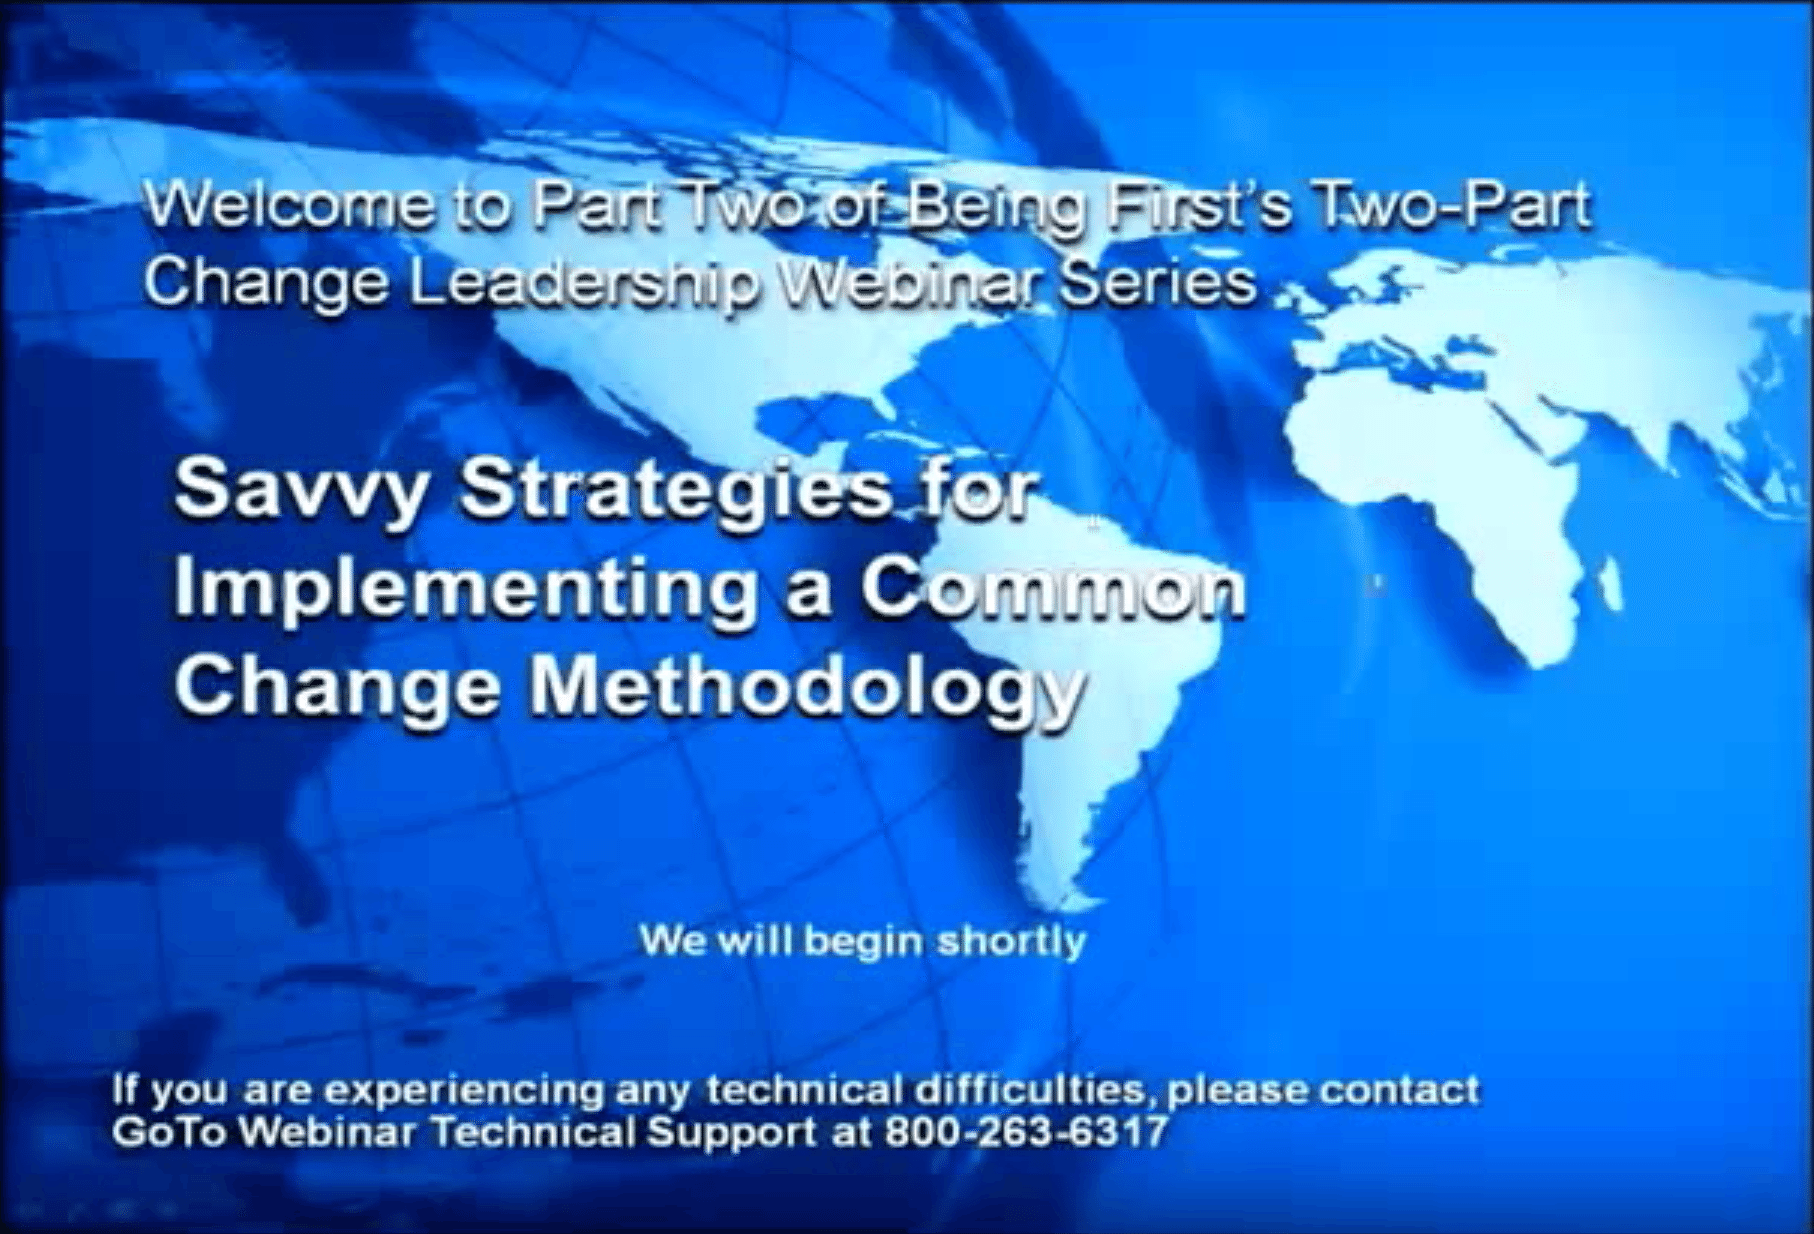 Savvy Strategies for Implementing a Common Change Methodology